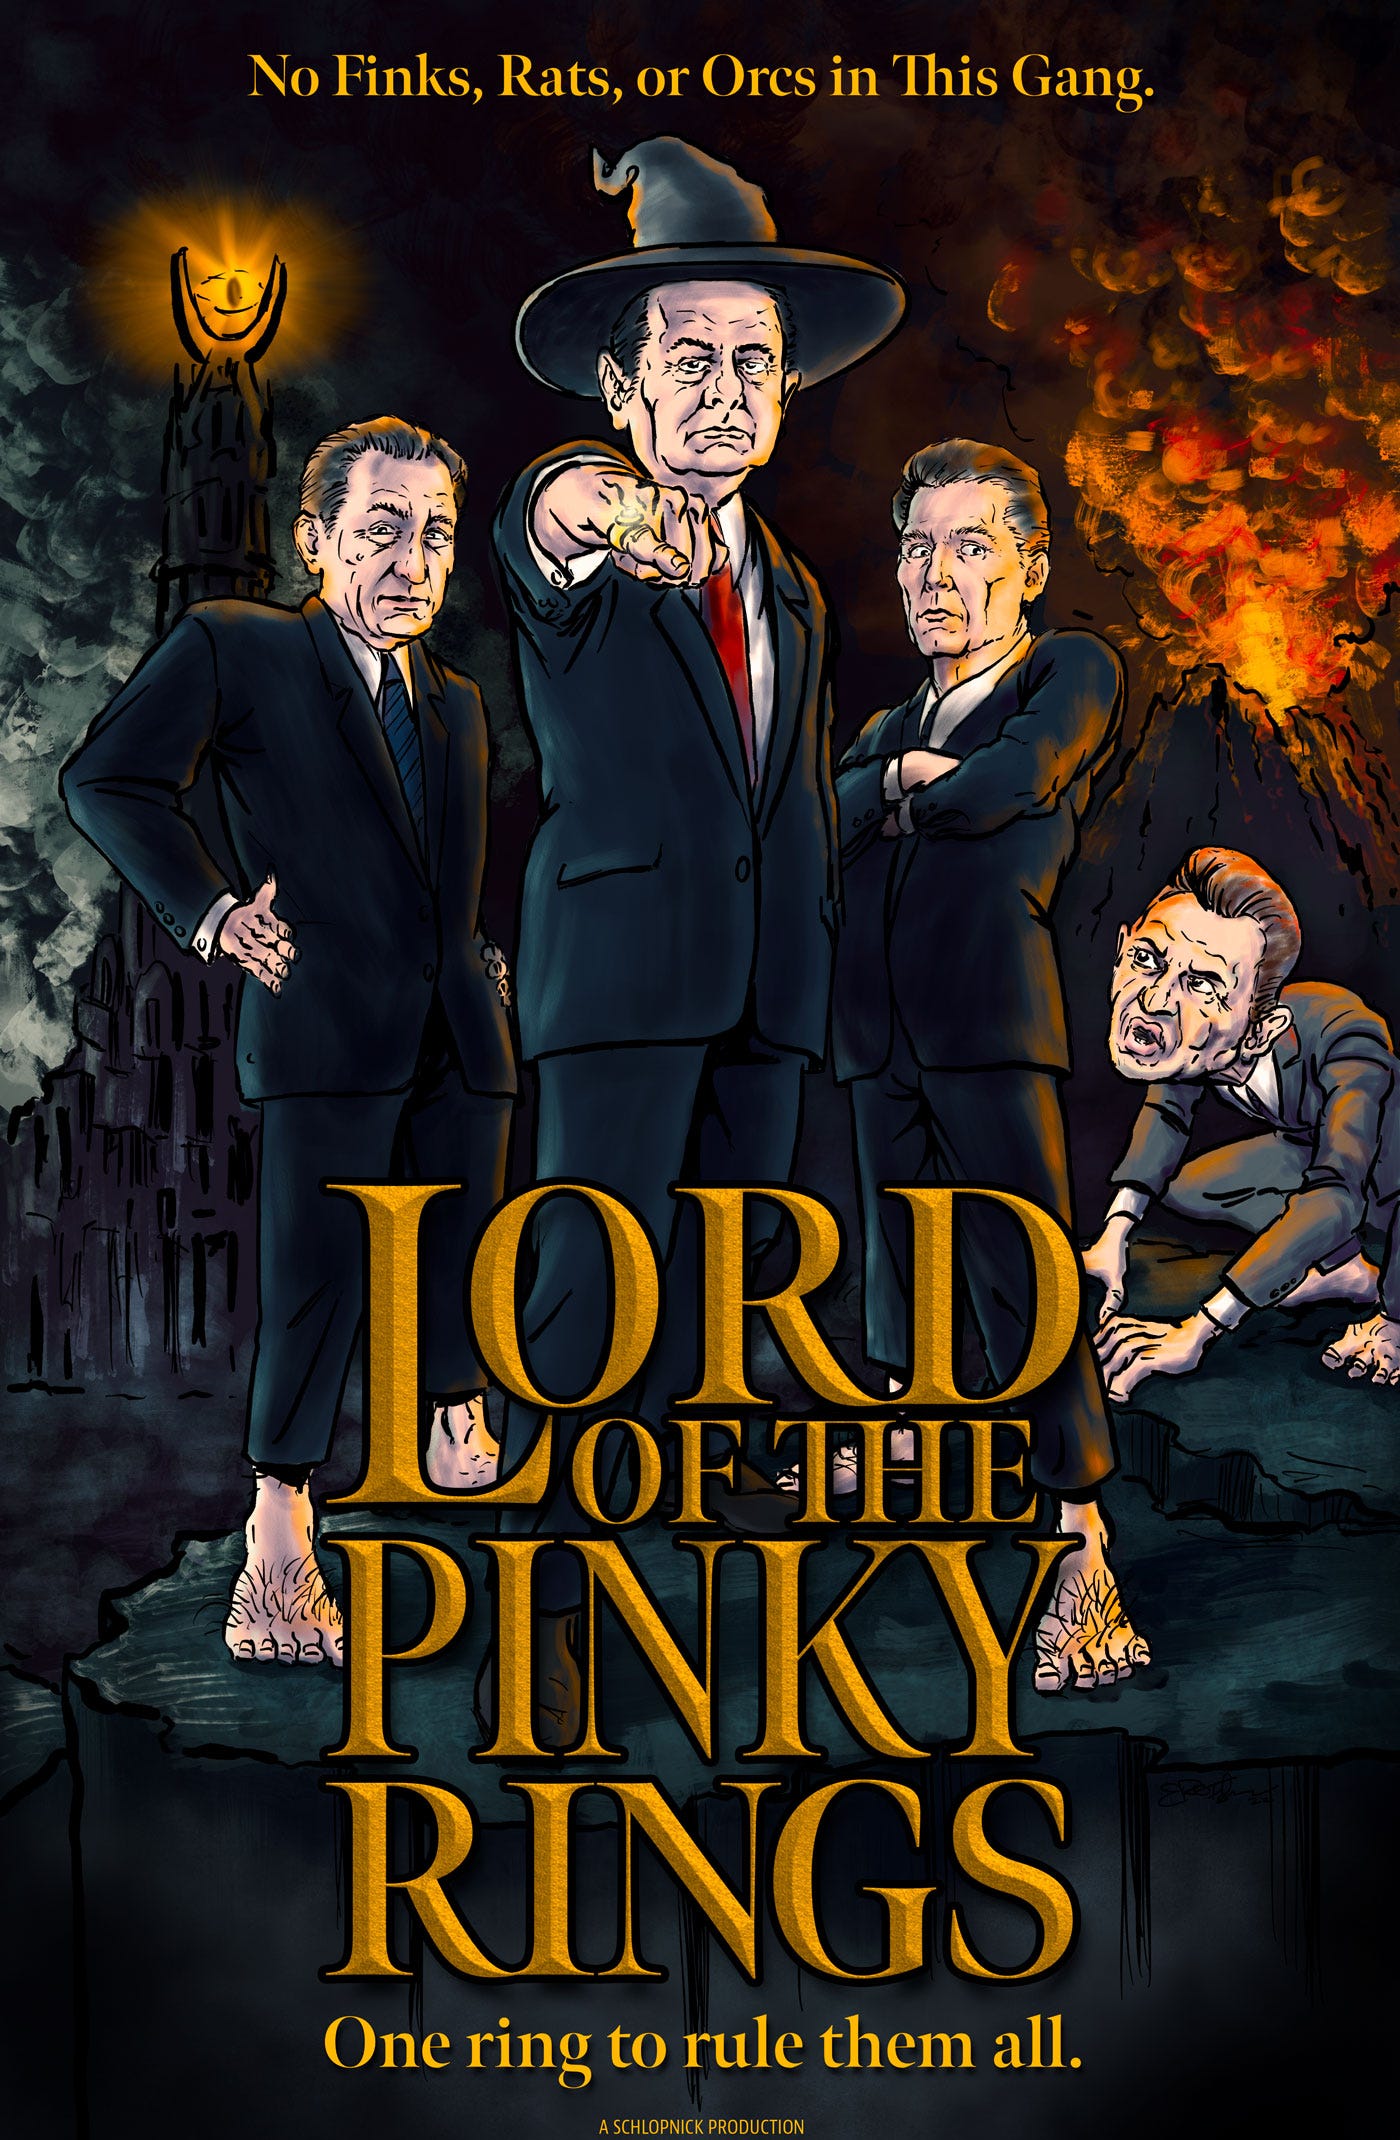 Lord of the Pinky Rings Poster Comic by E.R. Flynn